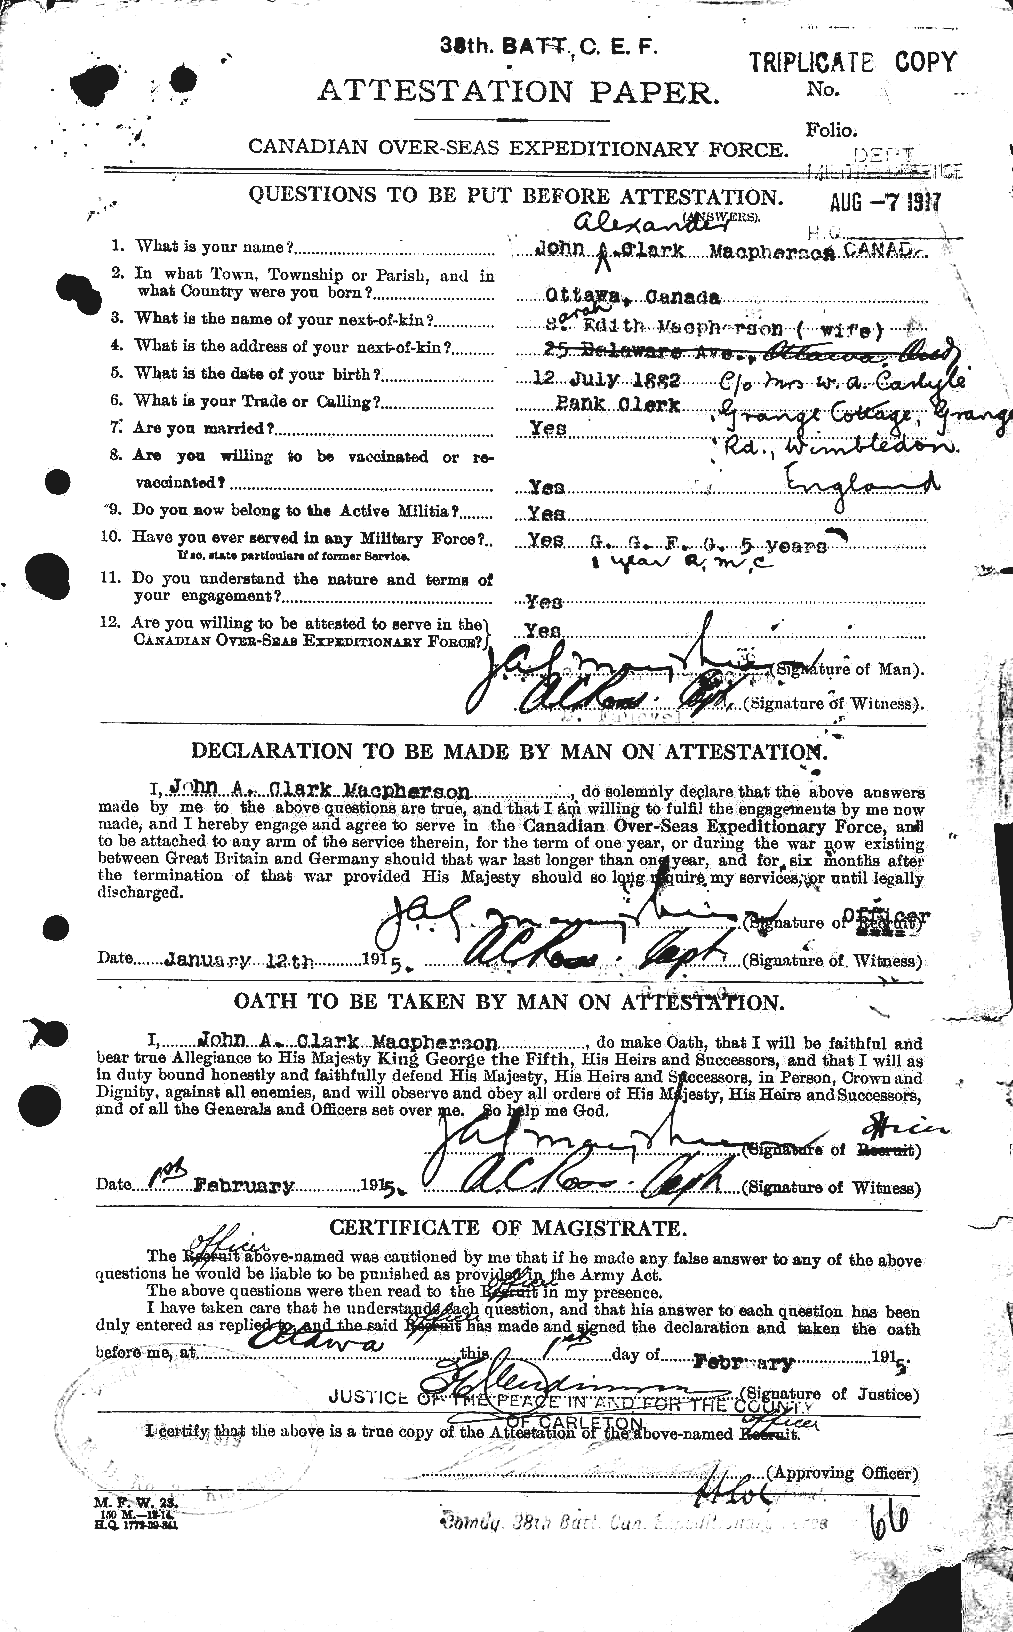 Personnel Records of the First World War - CEF 543133a